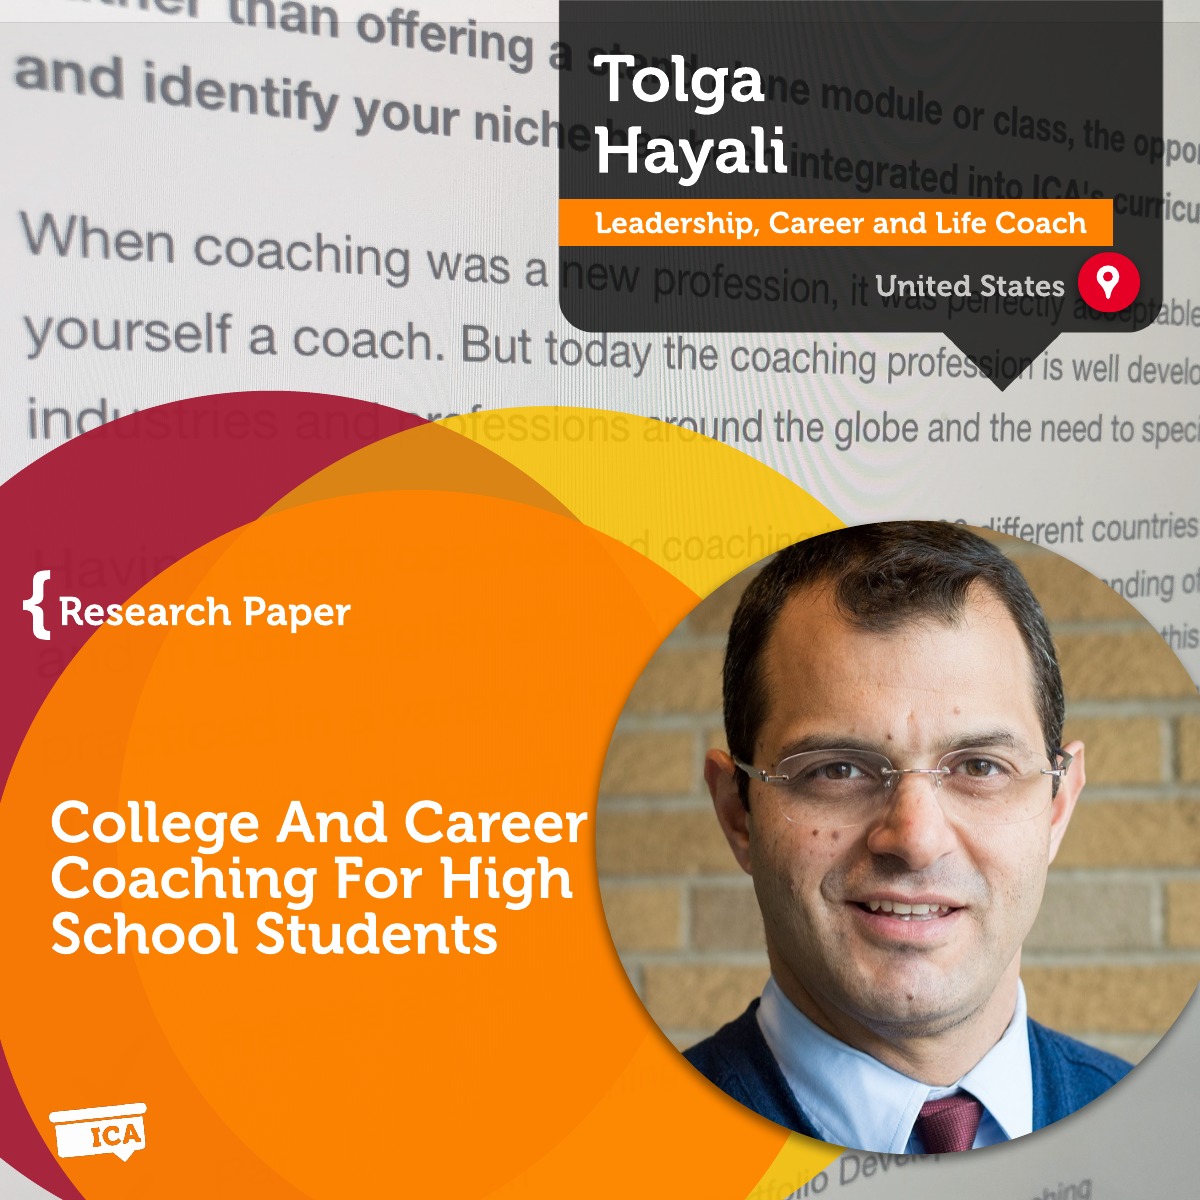 research-paper-college-and-career-coaching-for-high-school-students